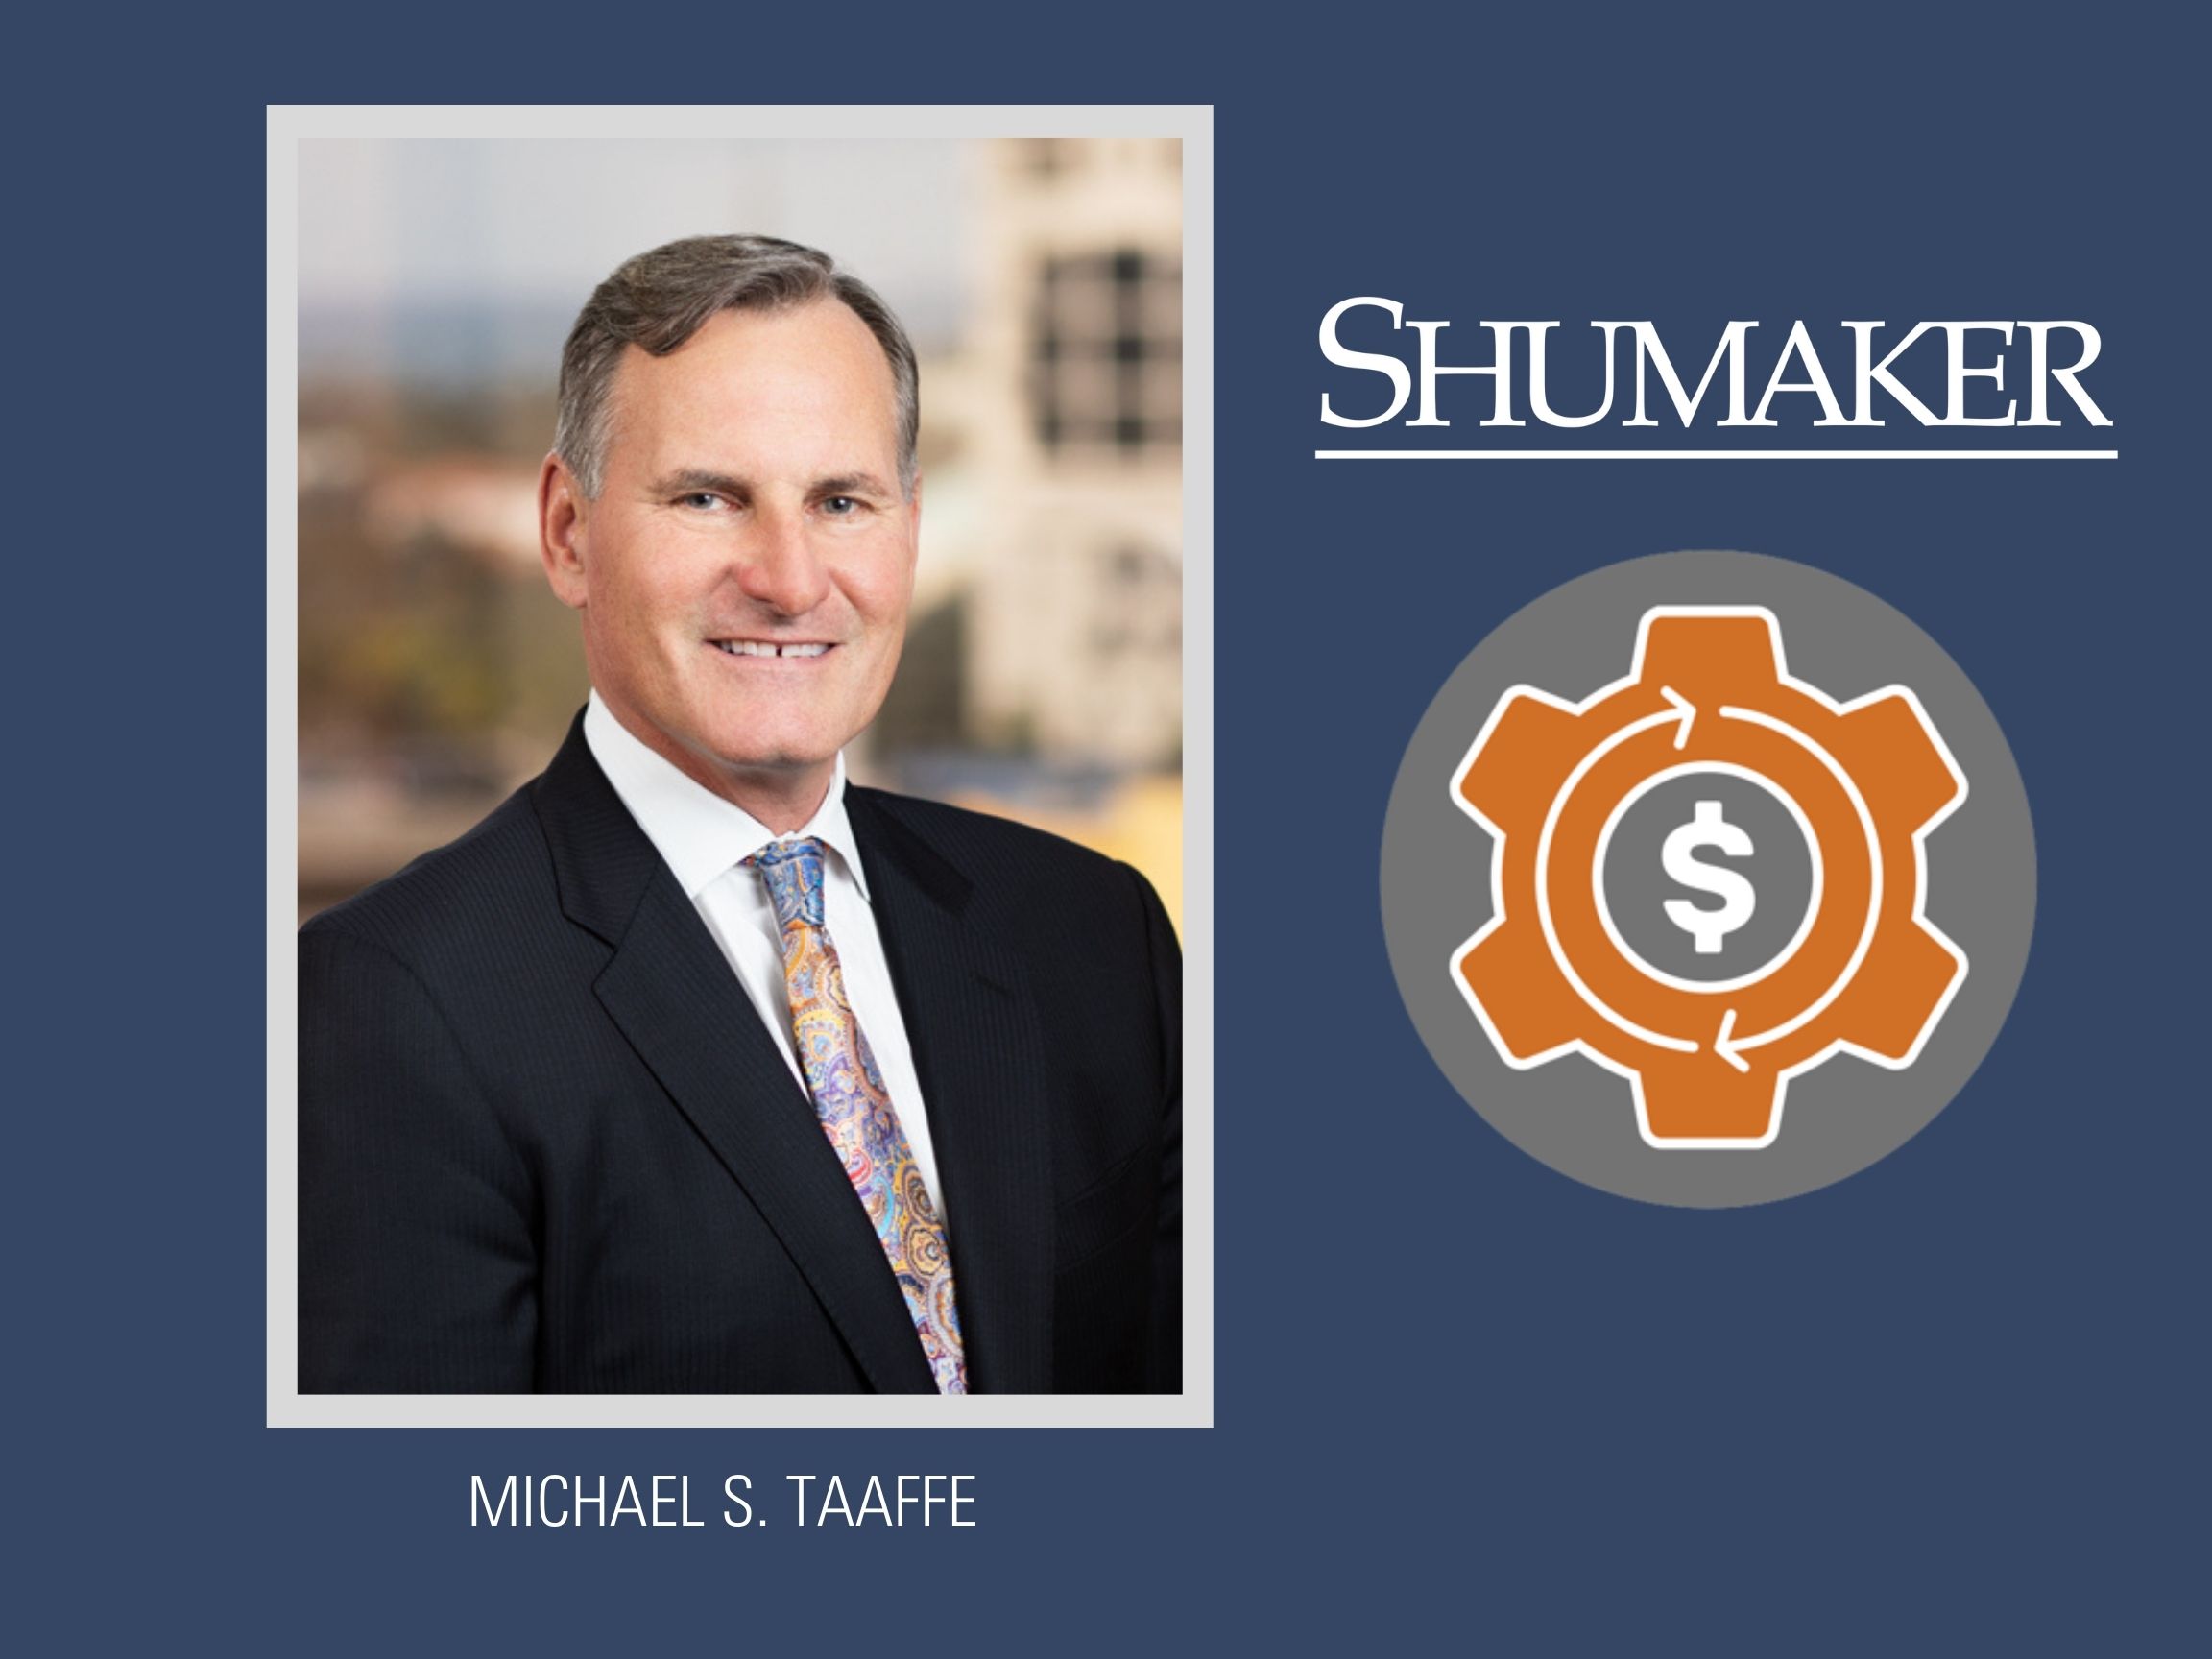 Michael Taaffe Named Chairman of Shumaker's Financial Services Business Sector 